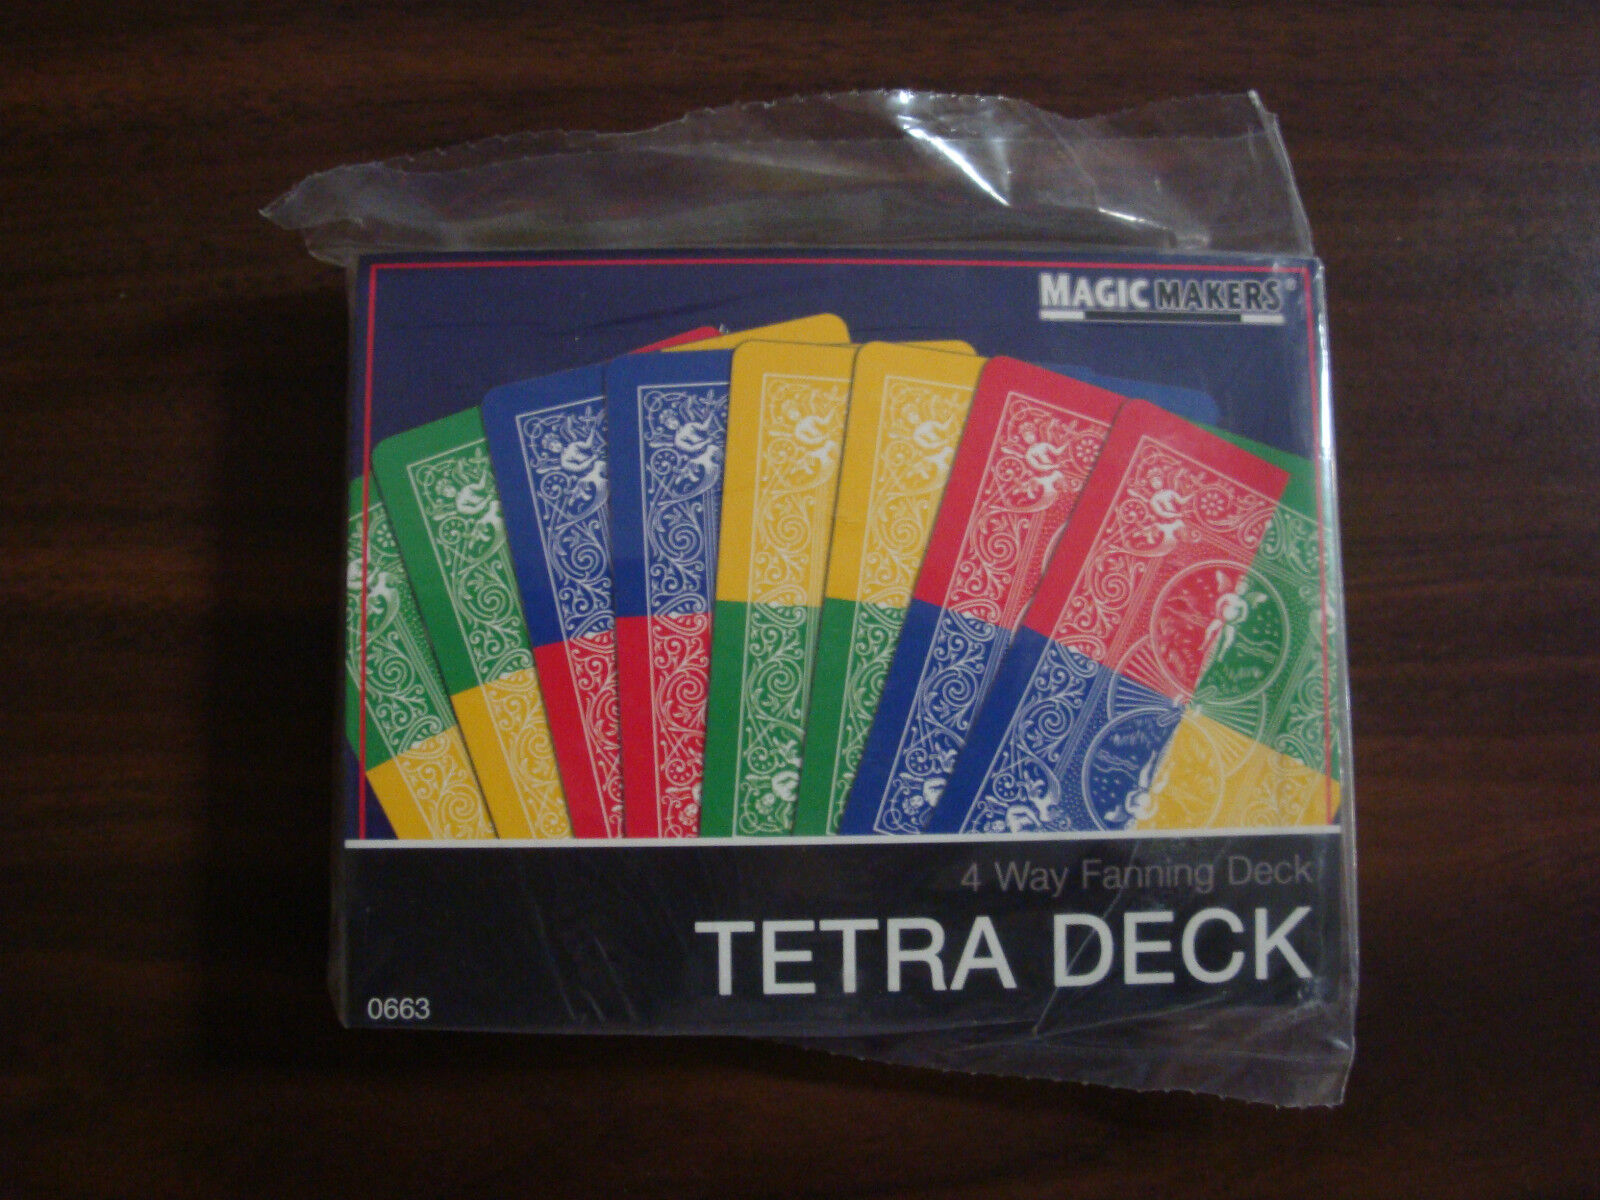 Tetra Bicycle Deck 4 Way Fanning Deck of Playing Cards Poker Size